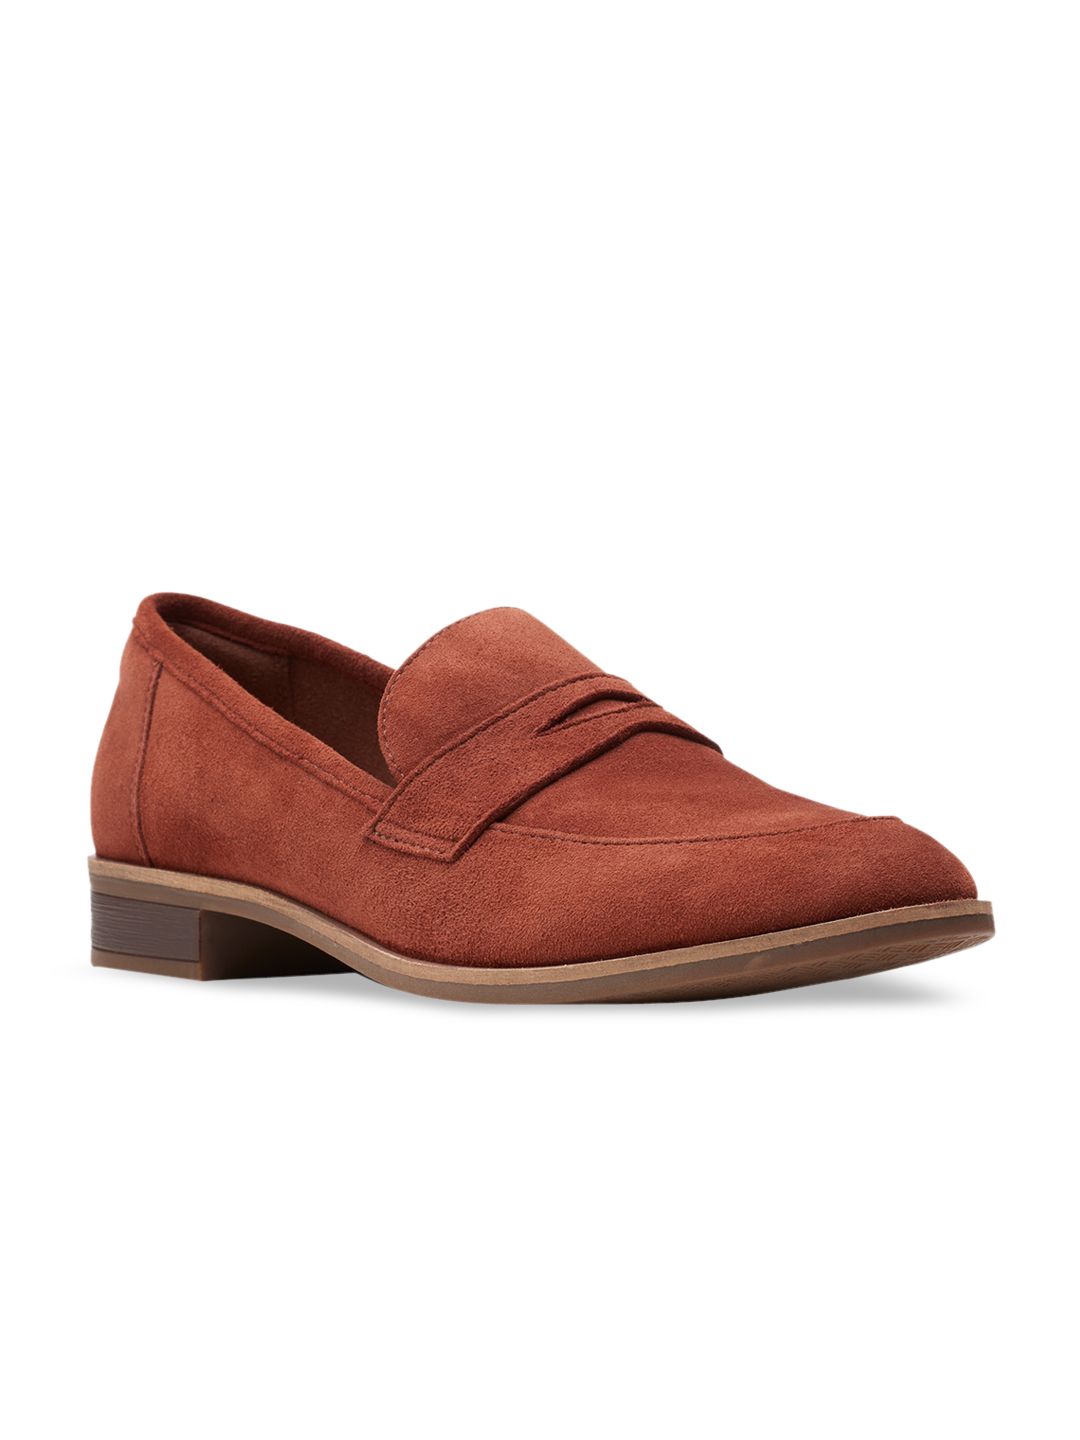 Clarks Women Brown Suede Loafers Price in India